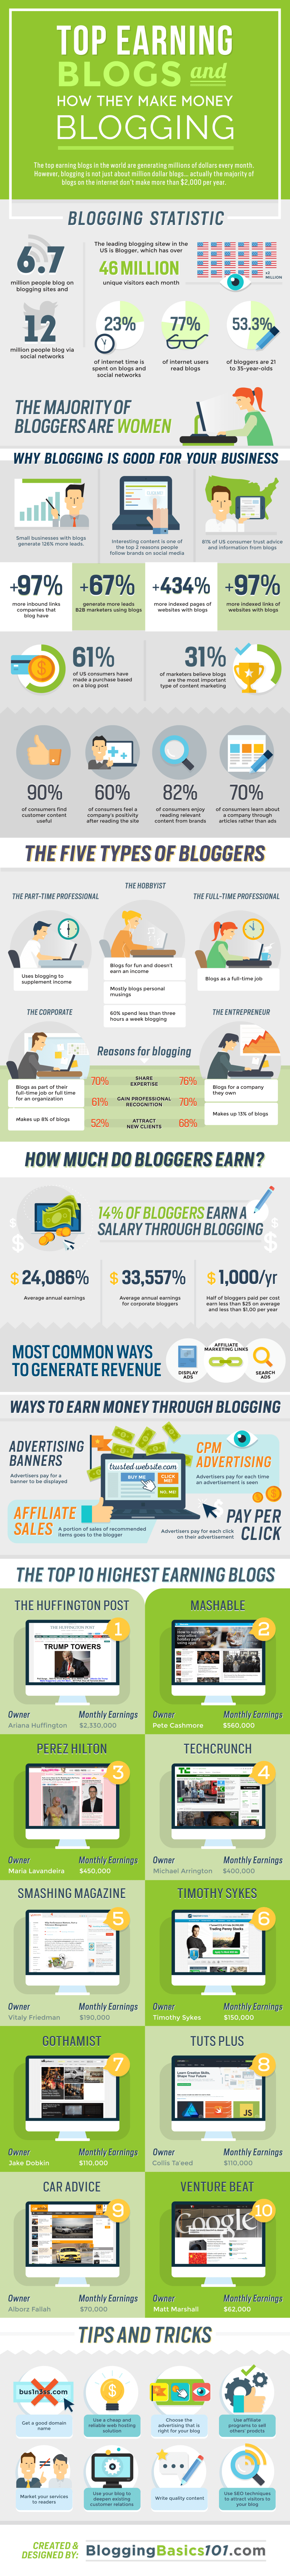 Top Earning Blogs and How they Make Money Blogging